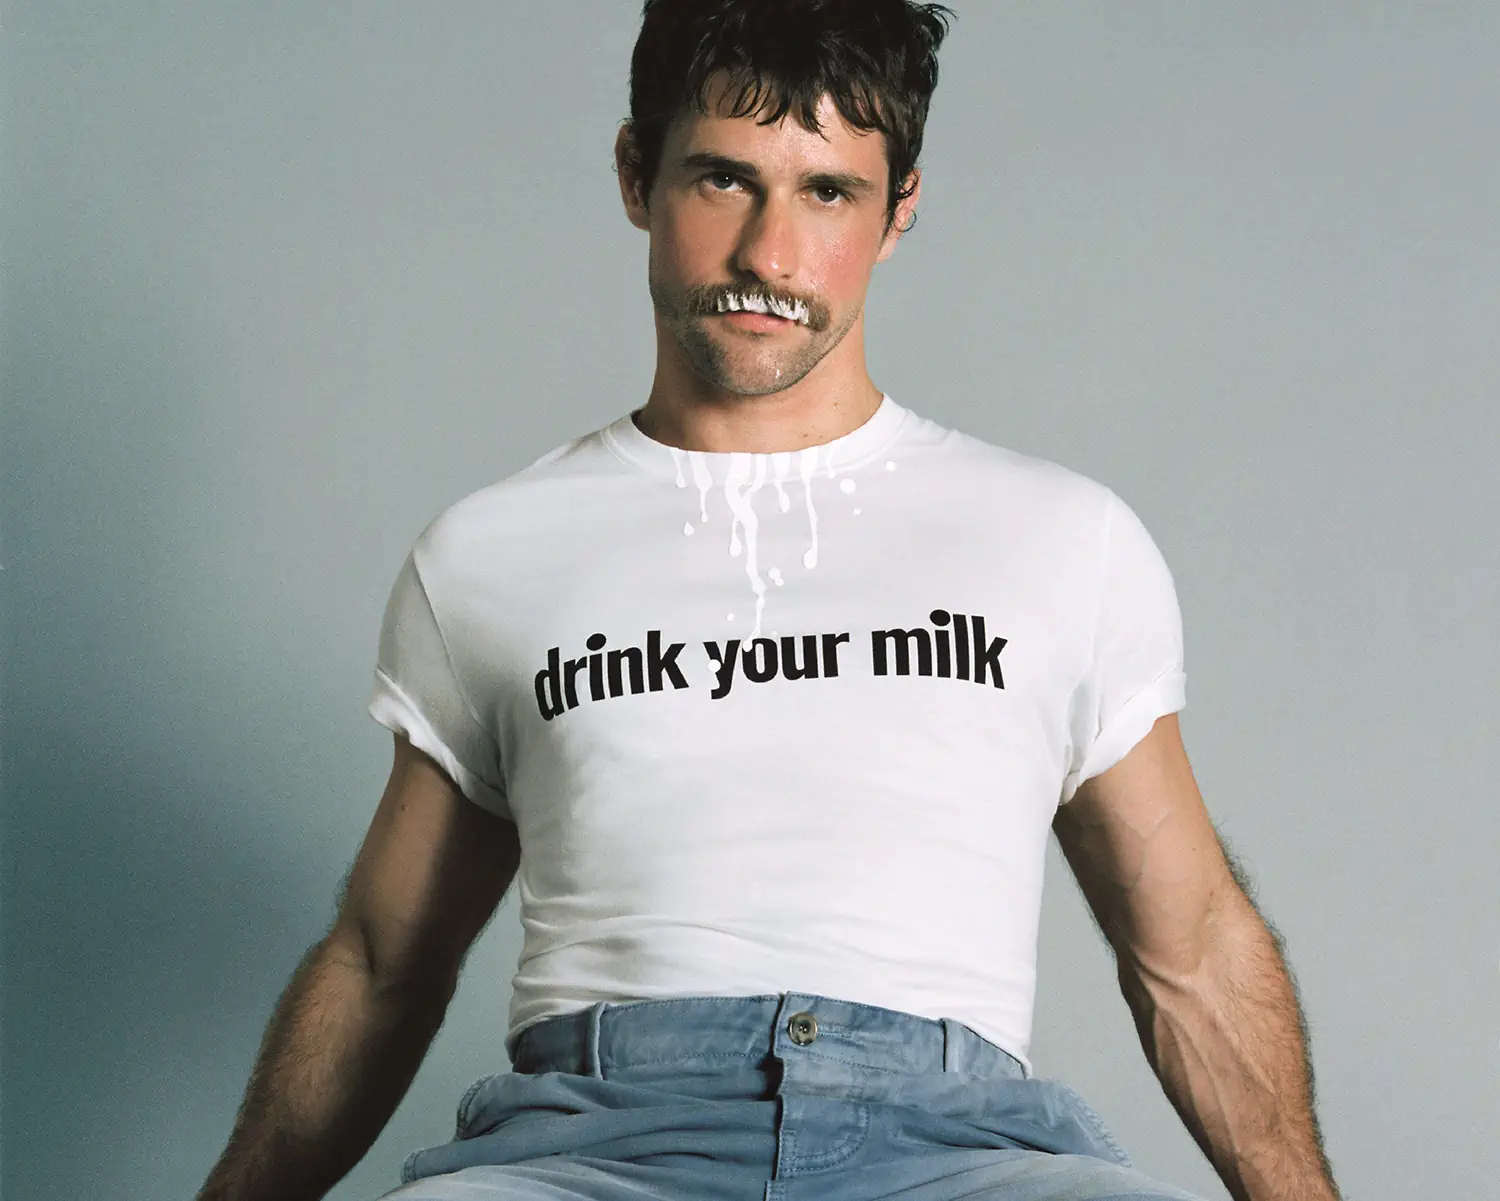 Loewe and Jonathan Bailey launch "Drink Your Milk" t-shirt for LGBTQ+ empowerment